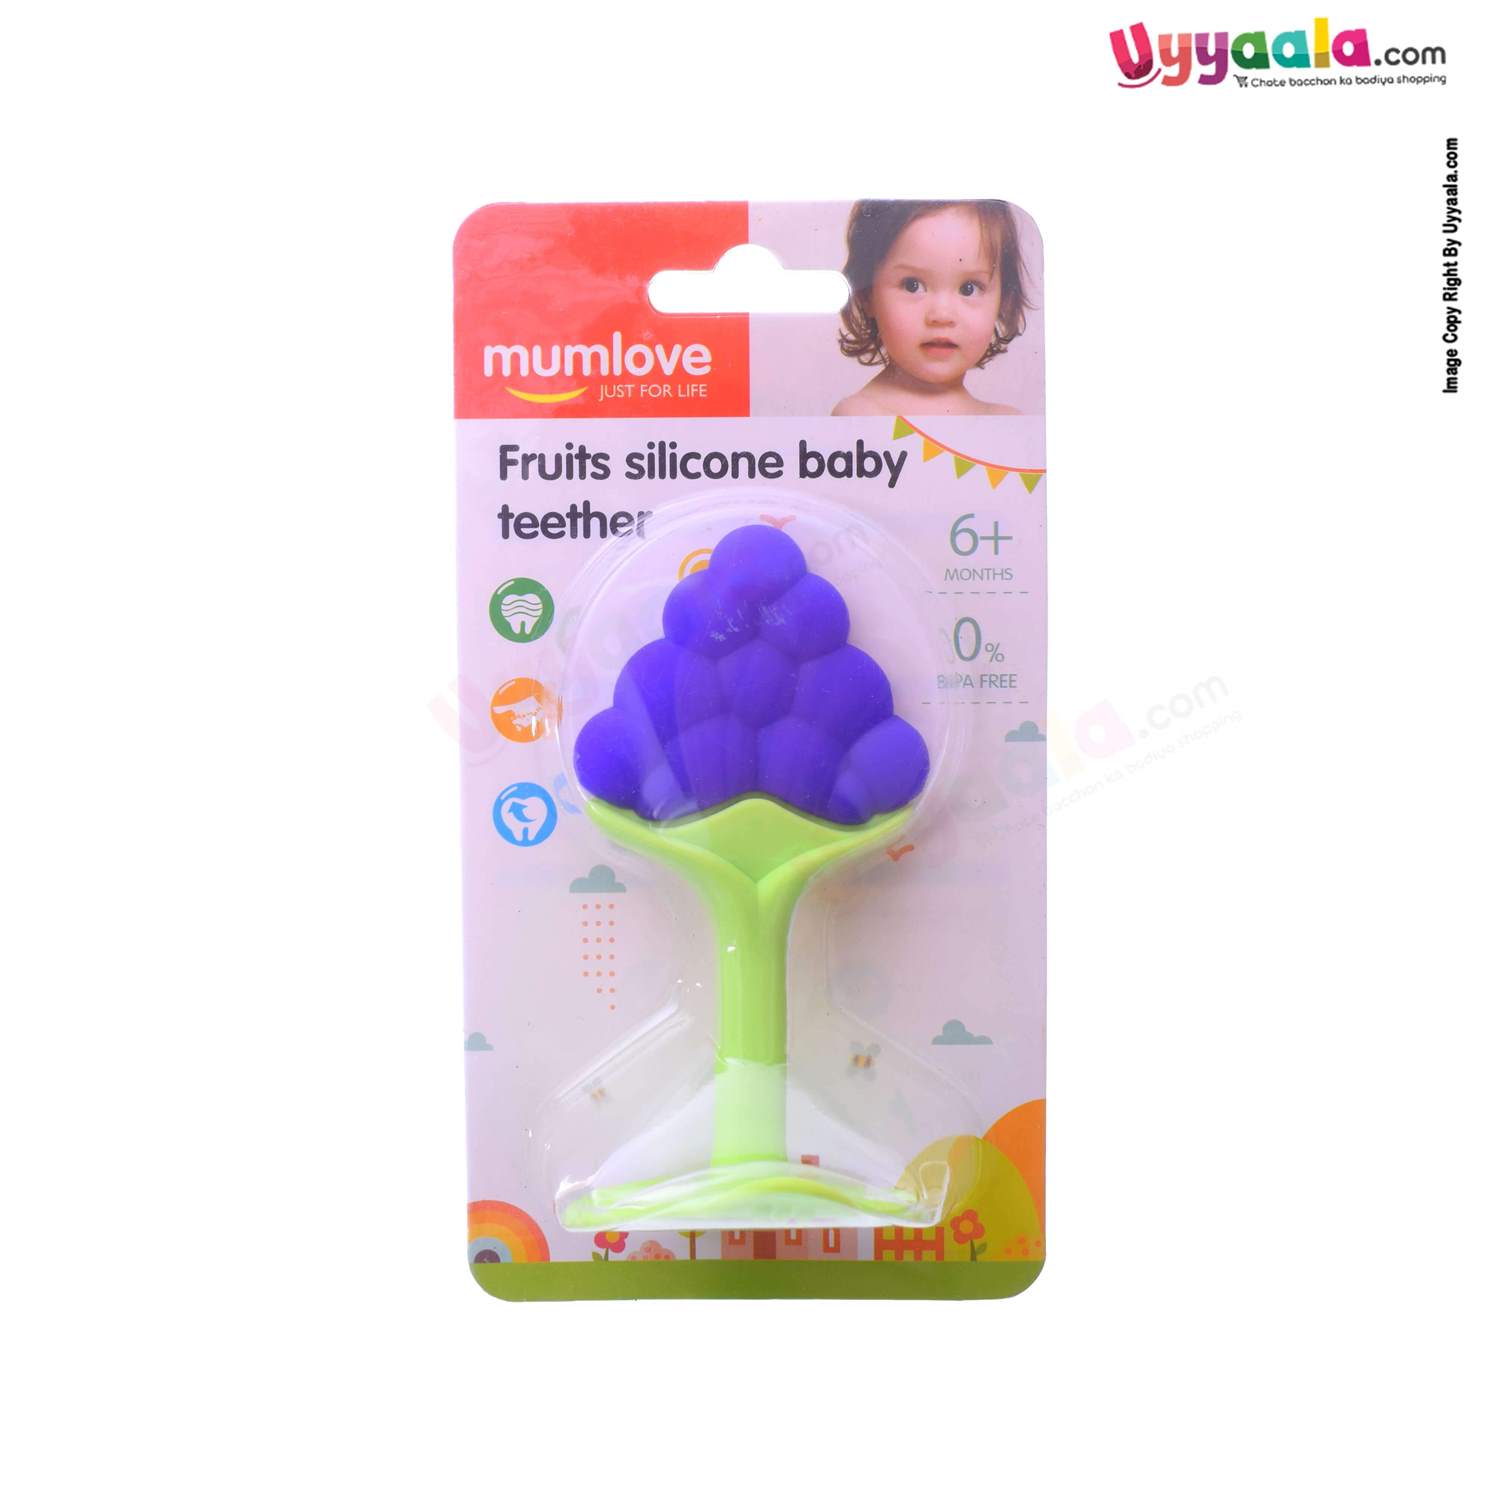 MUMLOVE  Fruits Silicone Baby Teether 6+m Age - Violet, Green